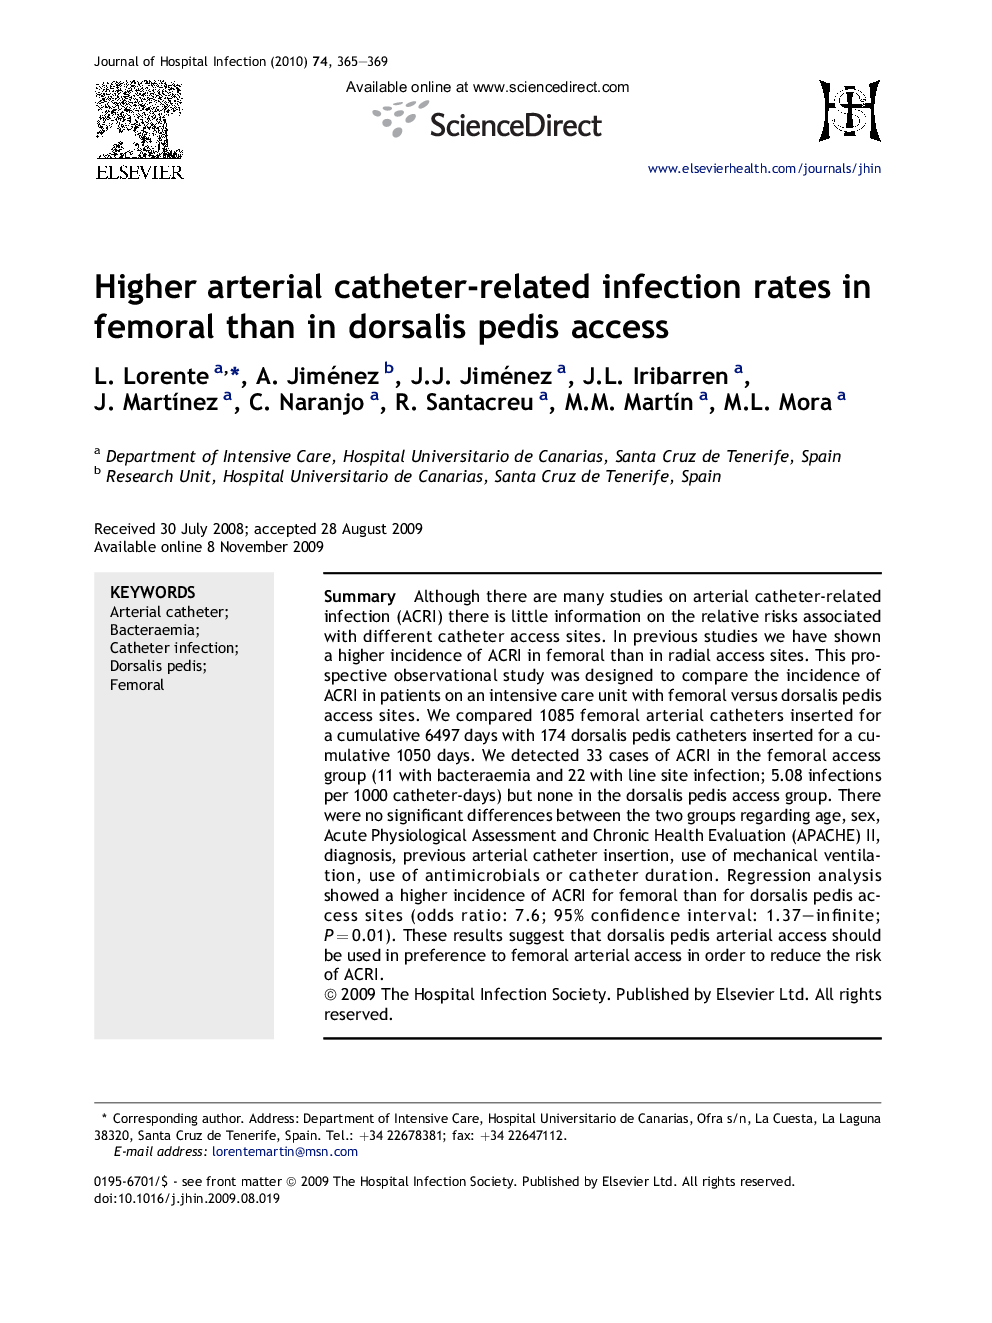 Higher arterial catheter-related infection rates in femoral than in dorsalis pedis access